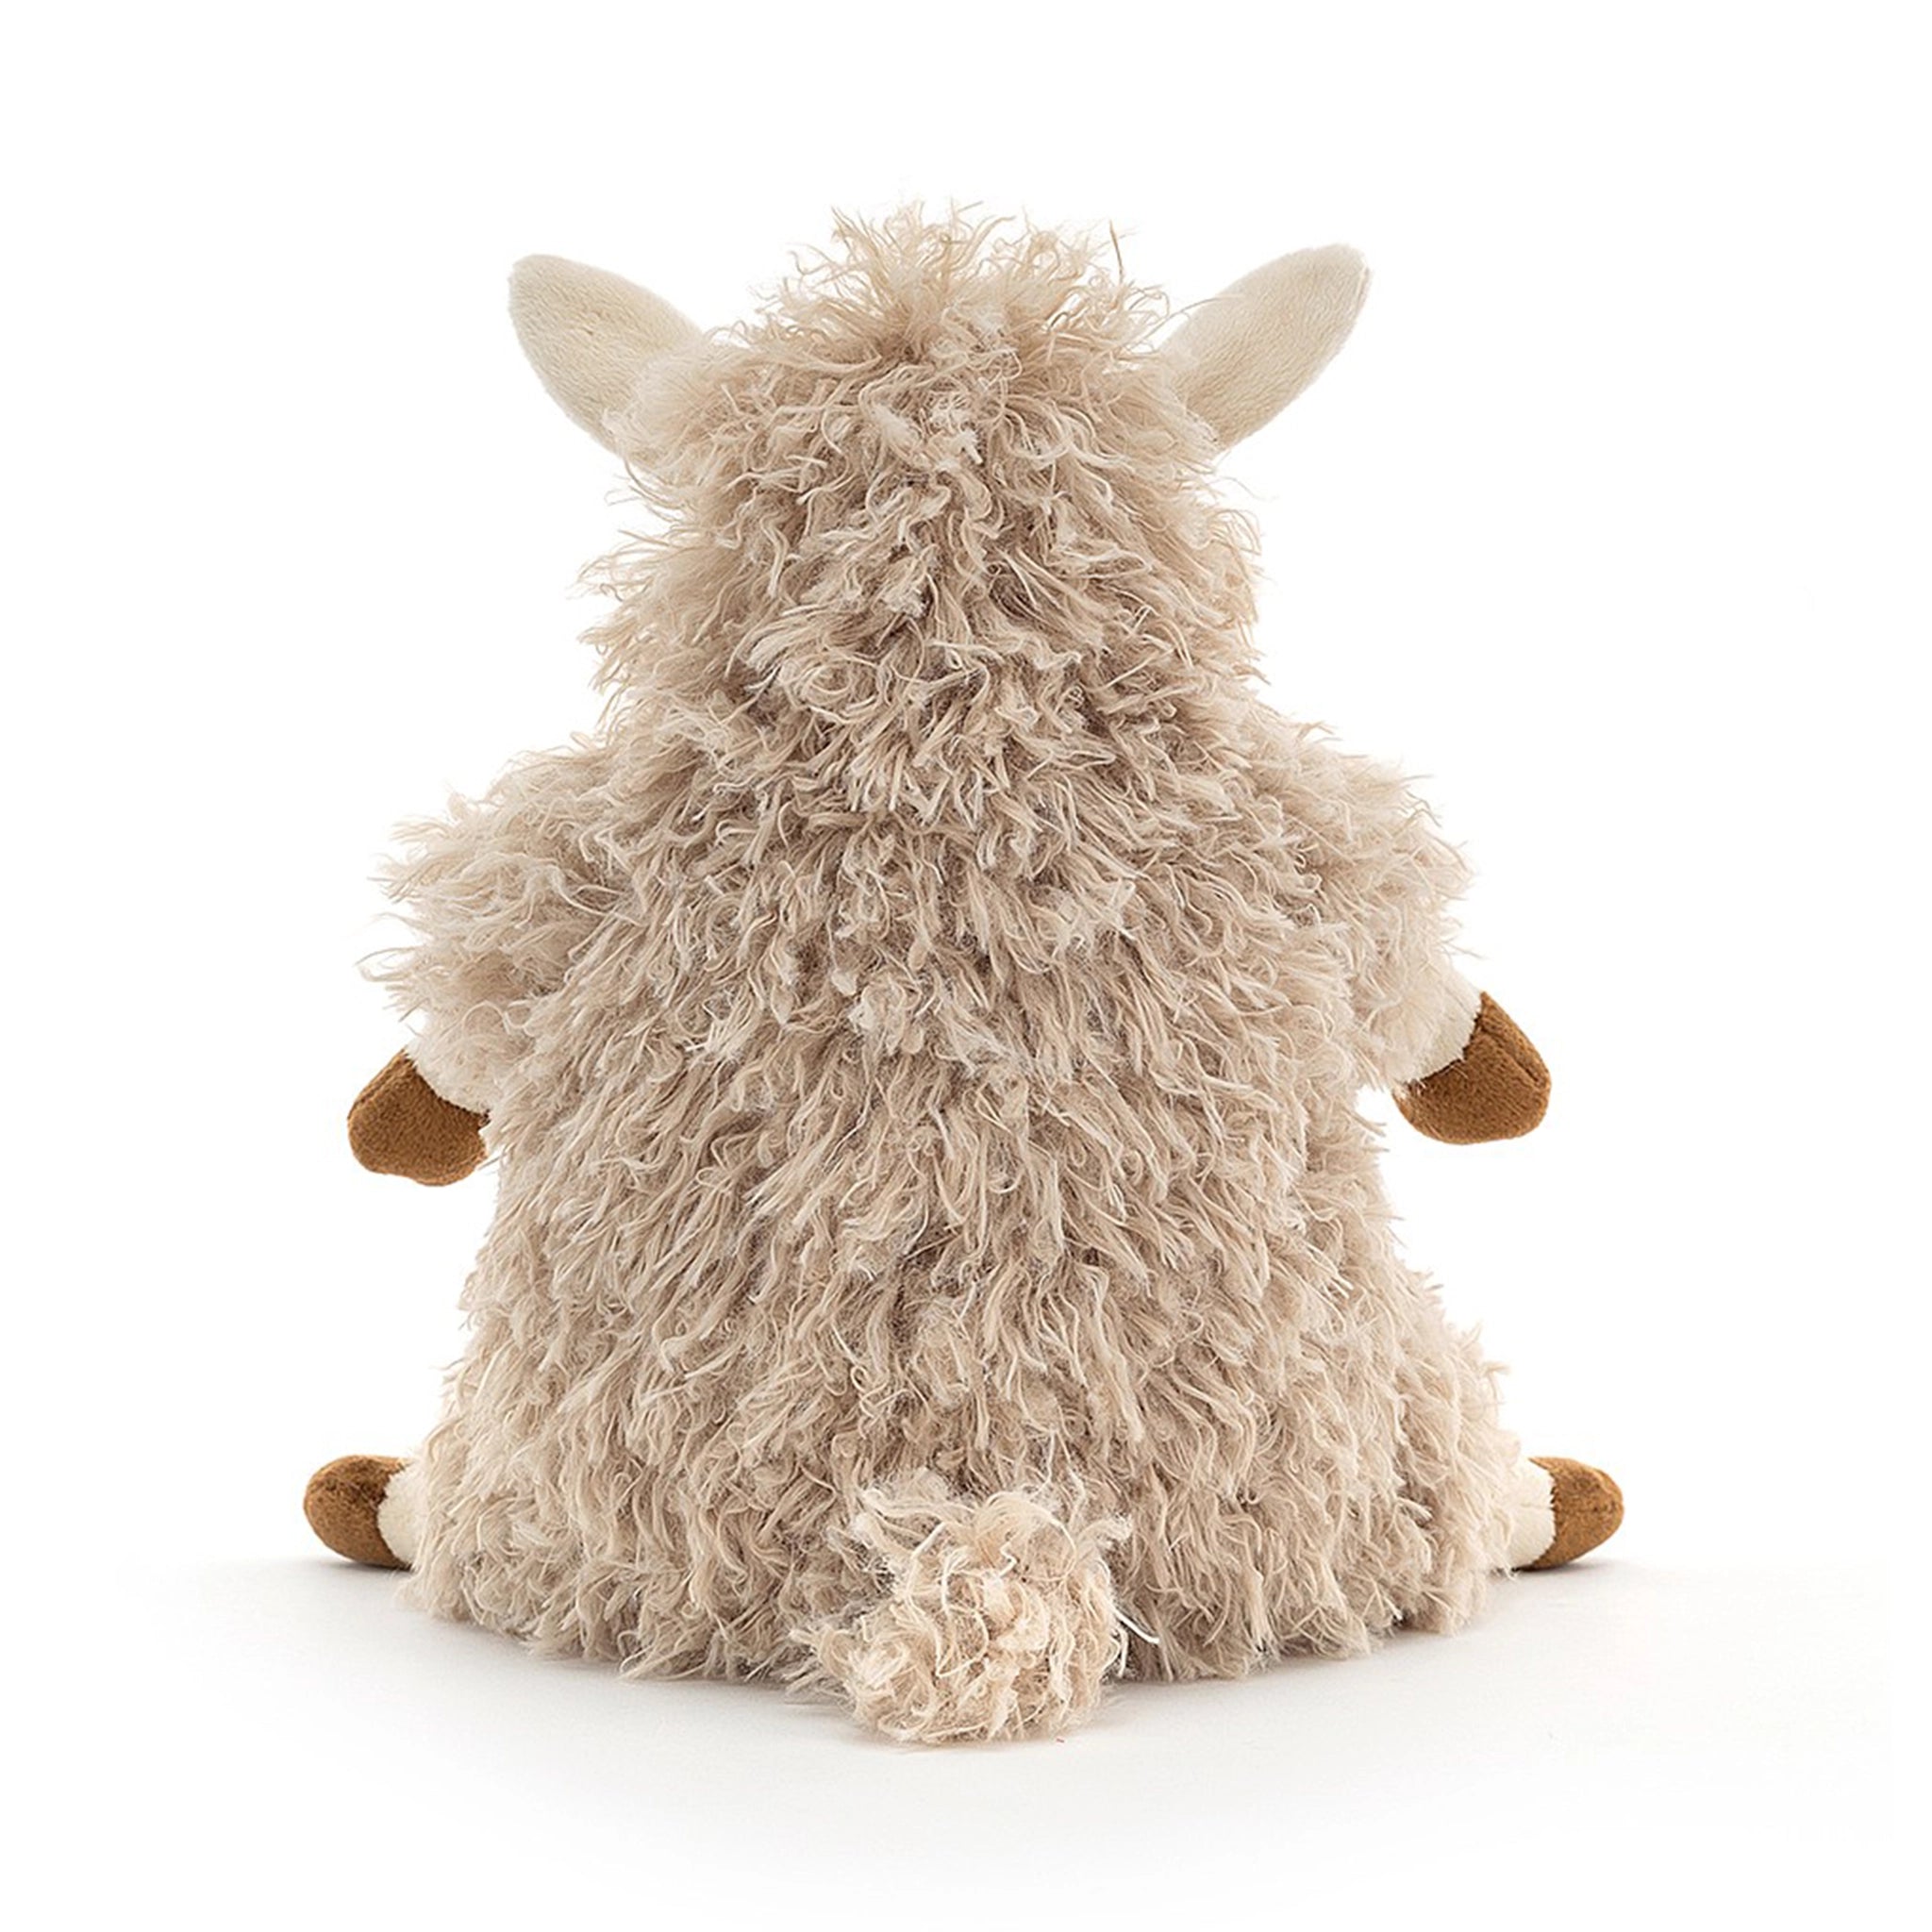 On a white background is a neutral tan stuffed animal sheep with fluffy fur. This photo shows the backside of the sheep.